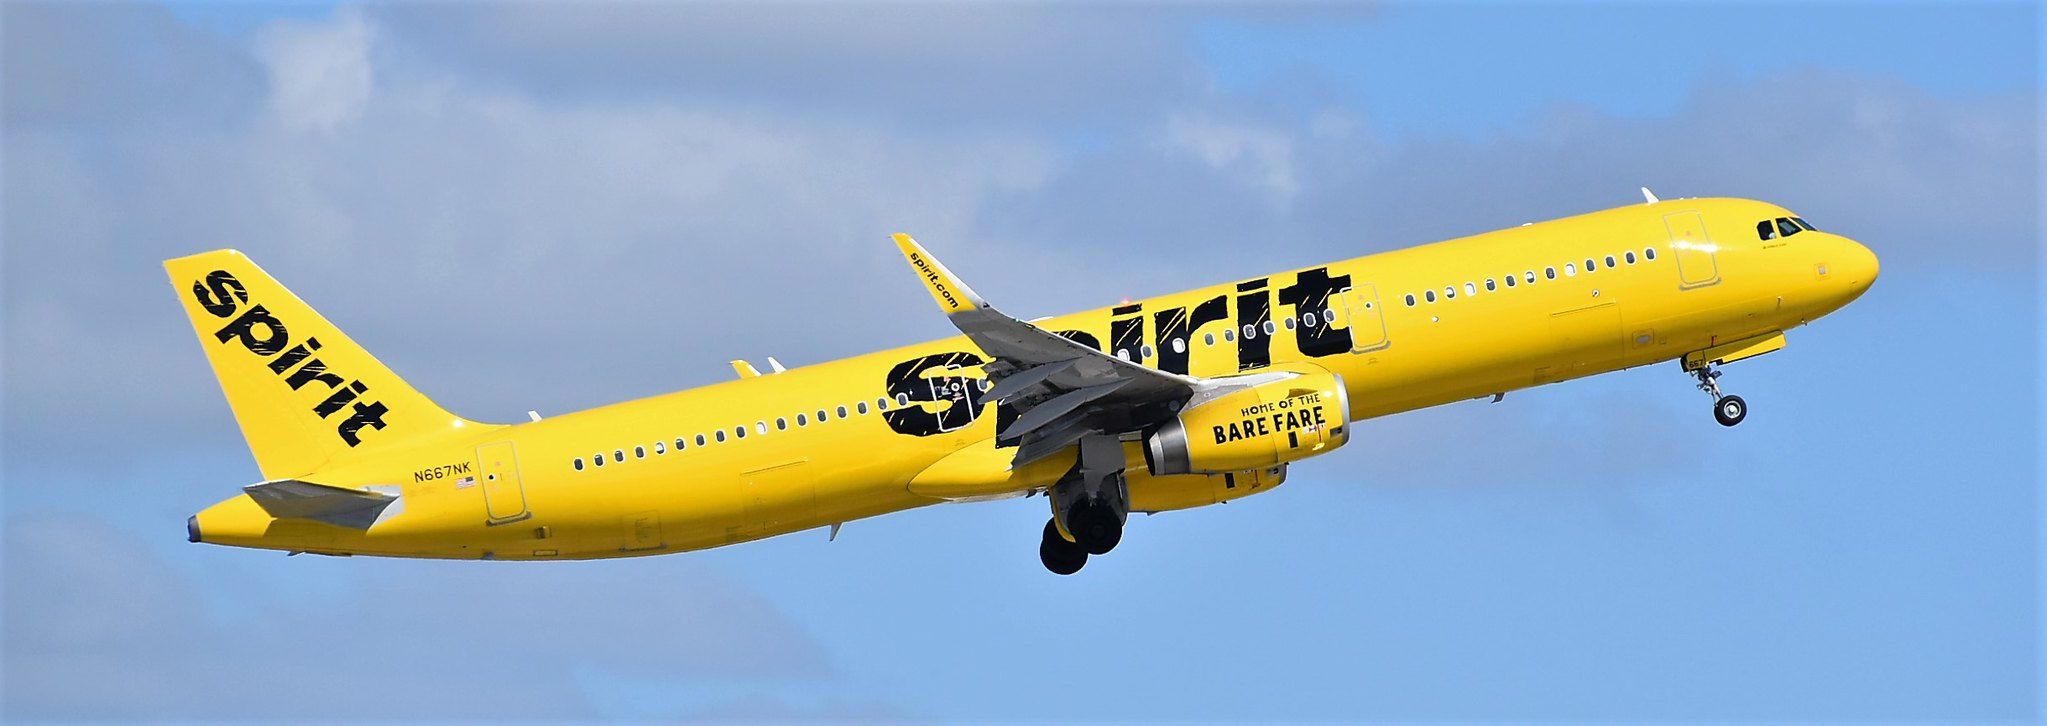 N667NK - Airbus A321(SL) of Spirit Airlines departing rwy.10L at Ft. Lauderdale,(Hollywood,) Inter'l. - FLL,Florida, U.S.A., 11/02/17.